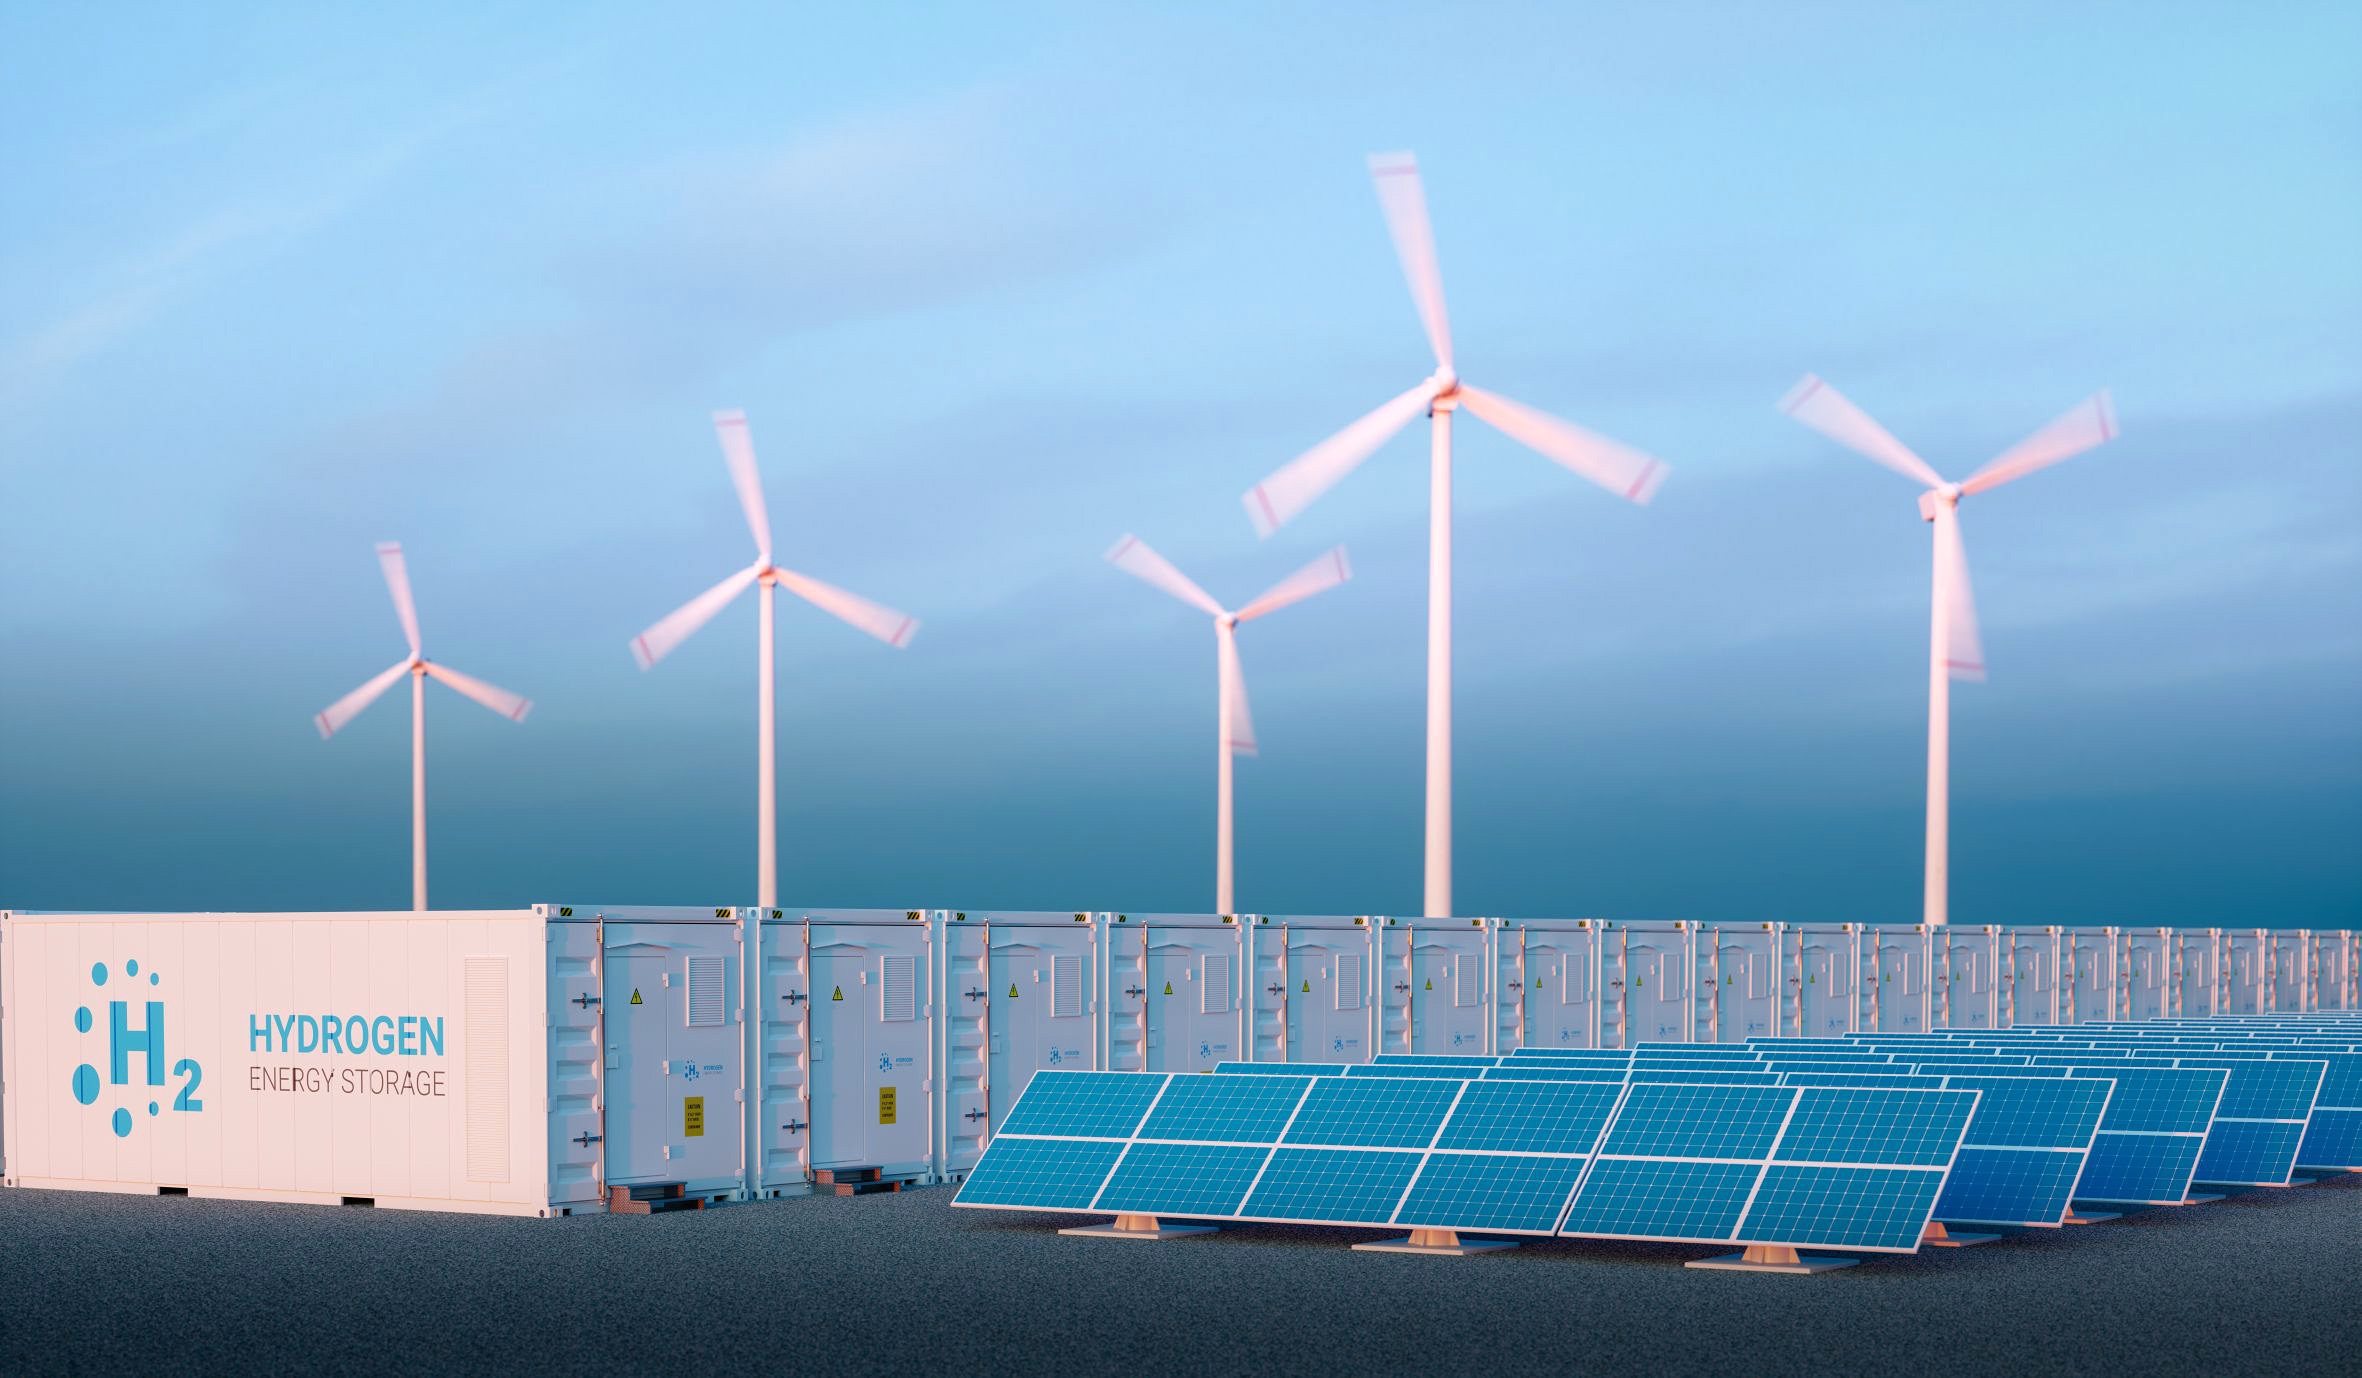 • Image symbolising green hydrogen generation: solar panels in the foreground with hydrogen storage containers behind them and rotating wind turbines in the background